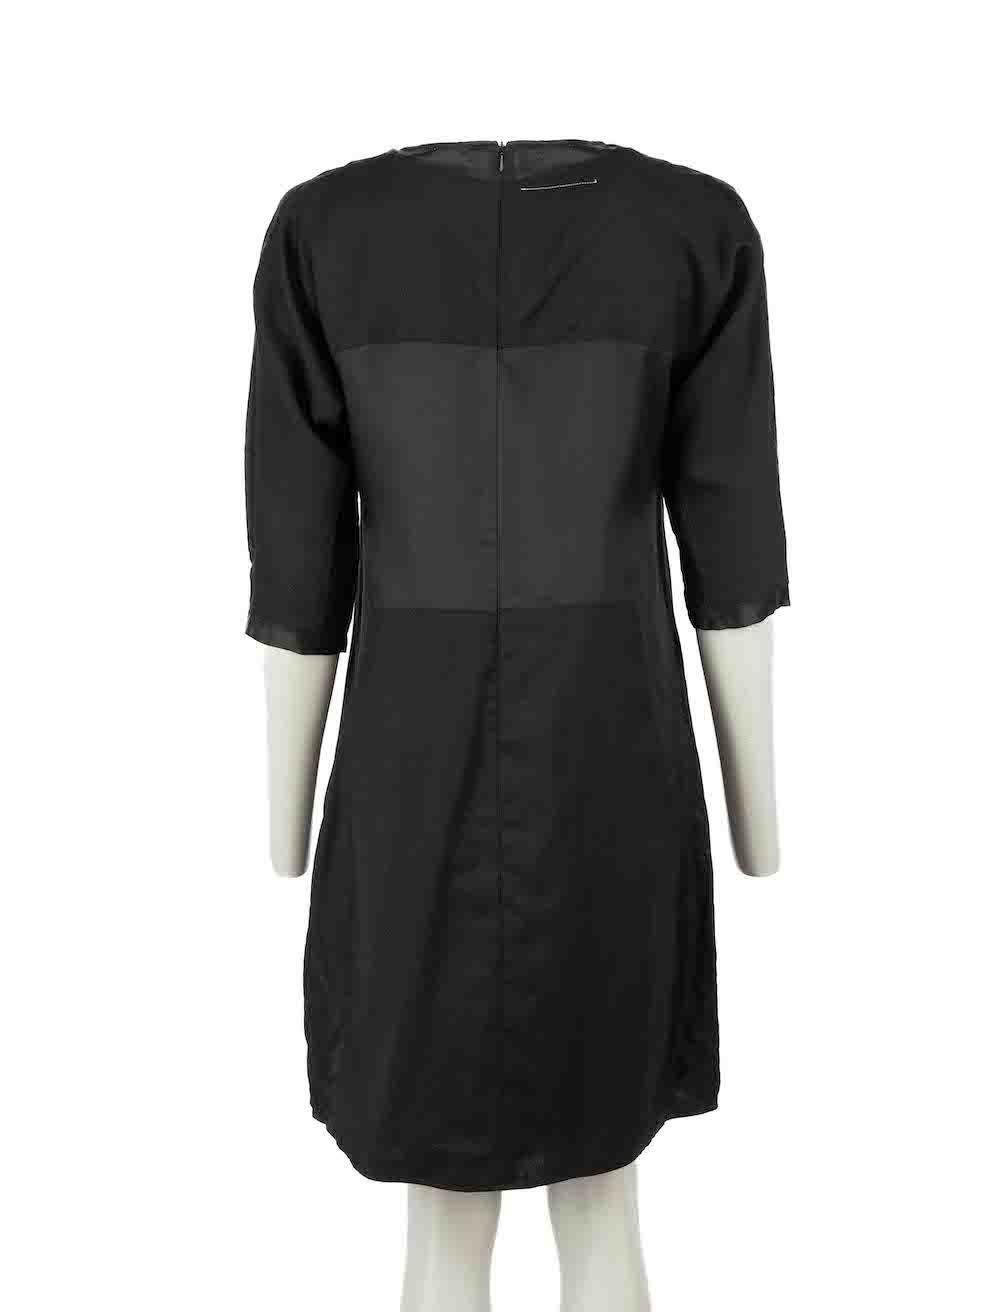 Maison Margiela MM6 Black Panelled Shift Dress Size M In Excellent Condition For Sale In London, GB